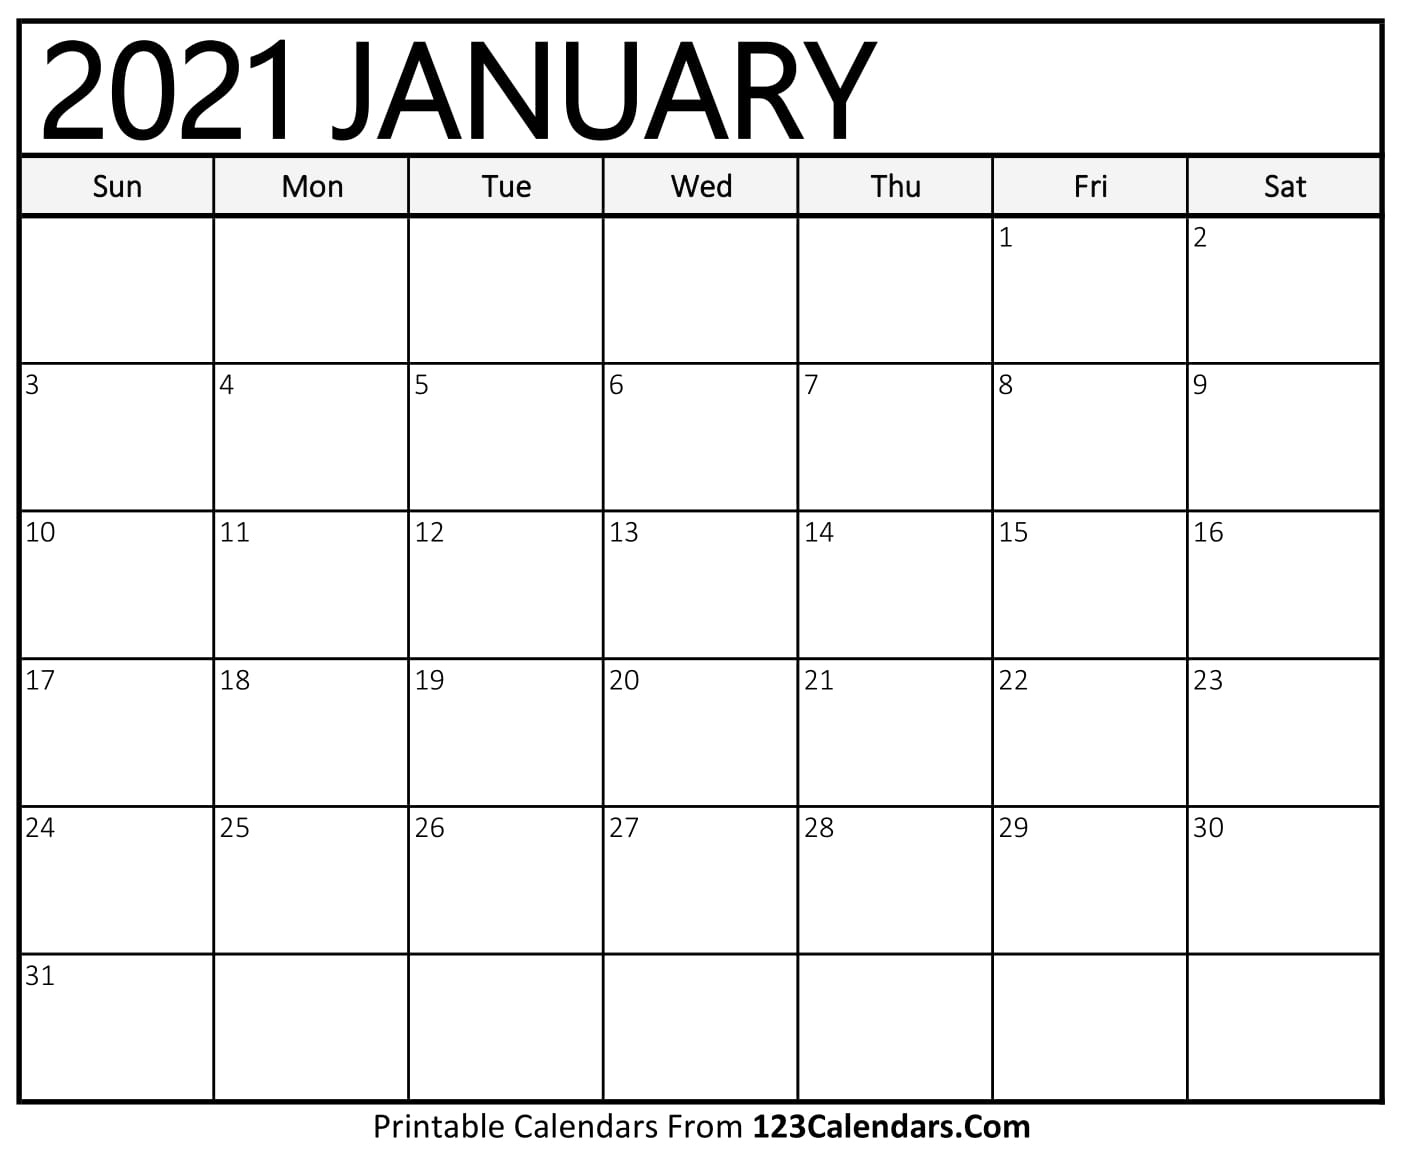 Free 2021 Printable Calendar July Canada Monthly | Month Calendar Printable July 2021 Calendar With Holidays Canada